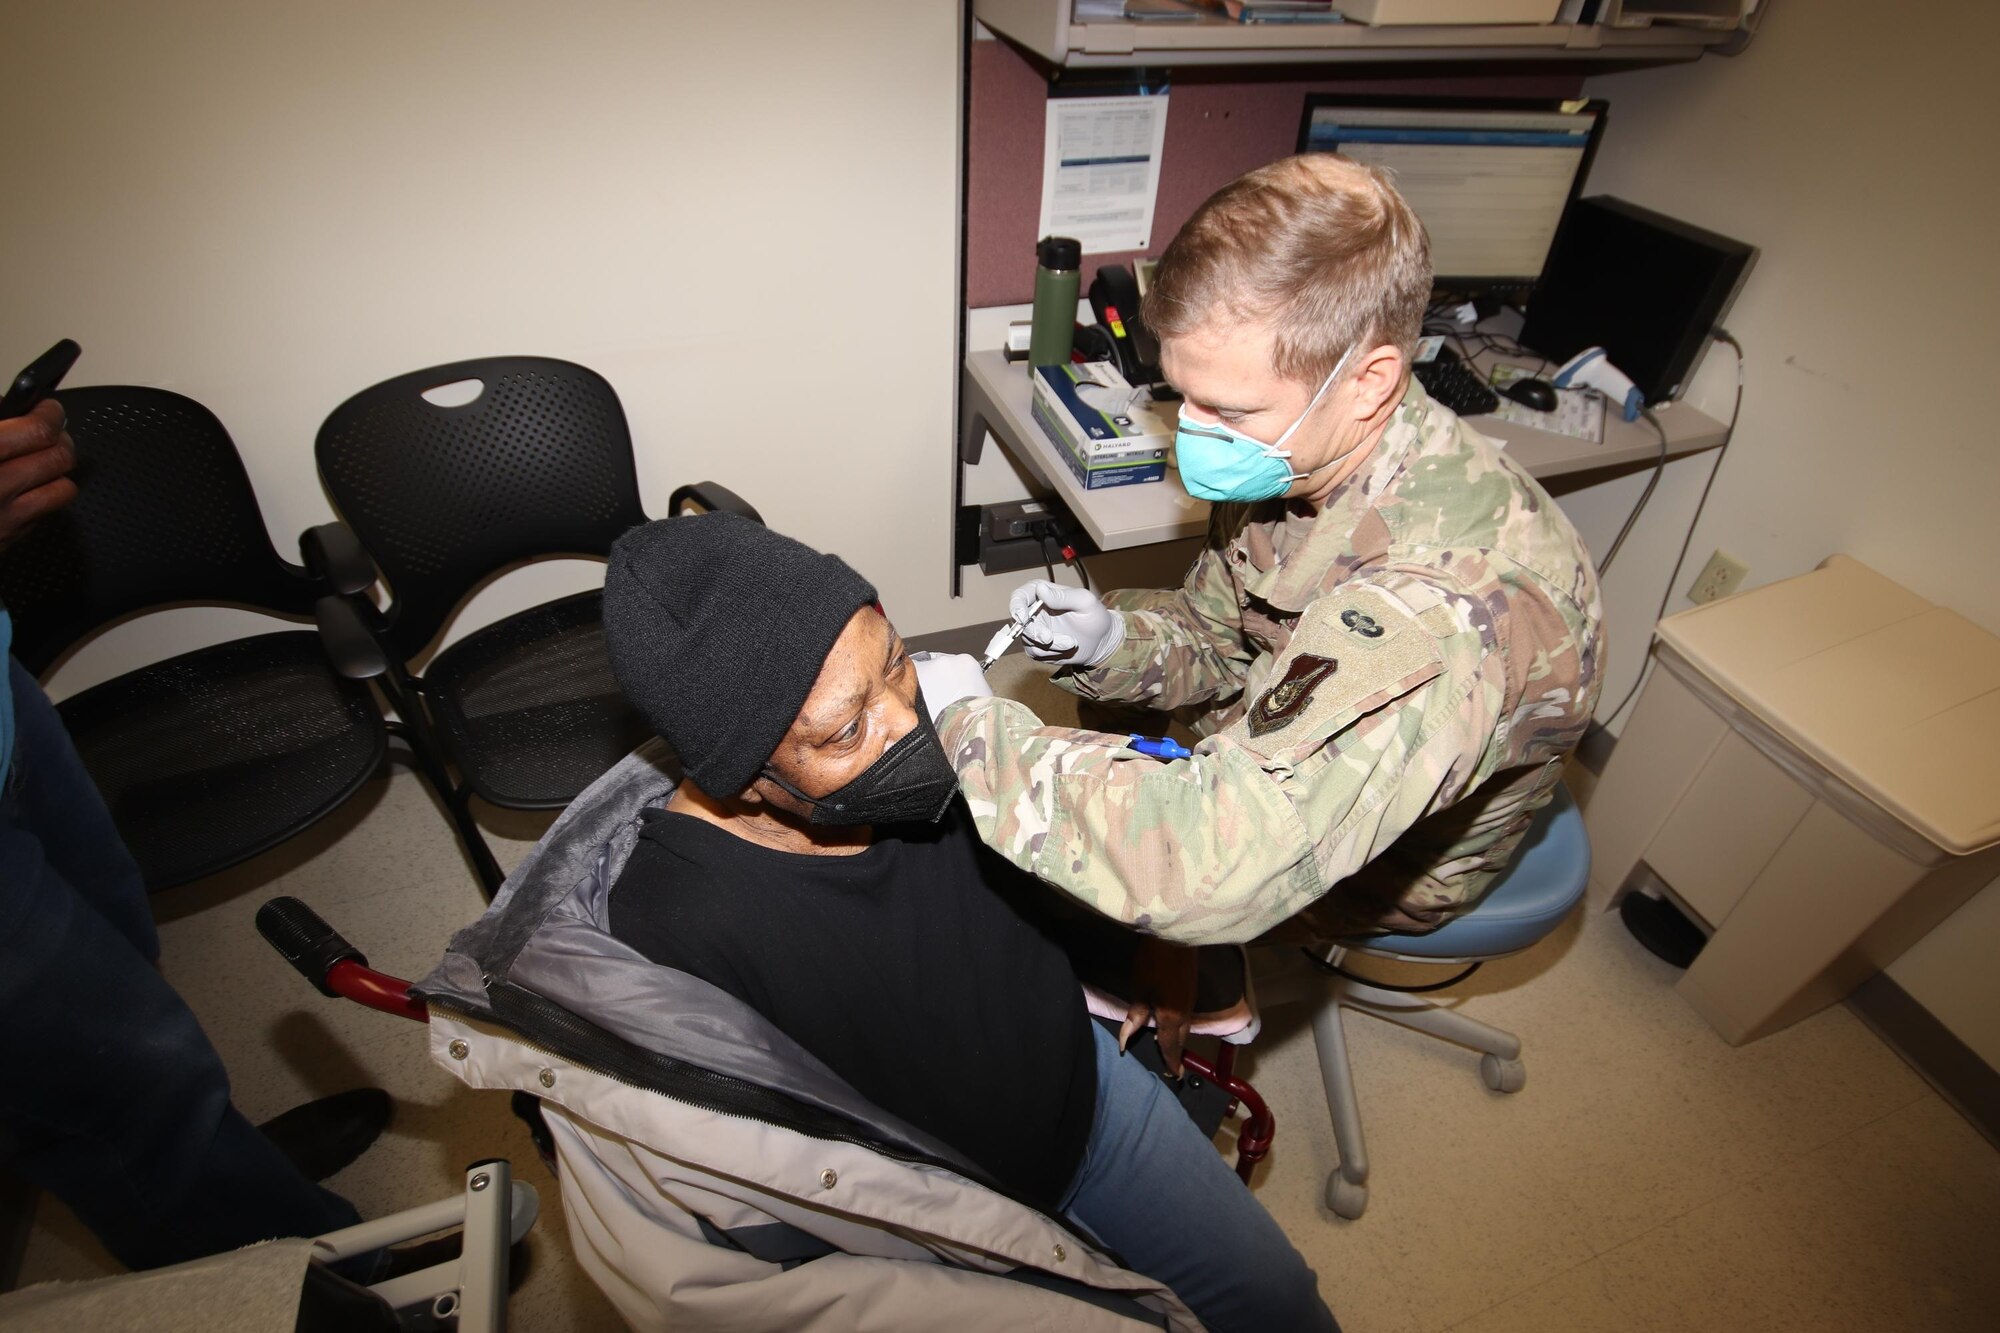 U.S. Air Force Maj Nicholas M. Nelson, a 673d Healthcare Operations Squadron Emergency Department clinical nurse specialist, administers the first of a two-dose series of a COVID-19 vaccine to a TRICARE beneficiary at Joint Base Elmendorf-Richardson, Alaska, Jan. 29, 2021. JBER is inoculating personnel following the Department of Defense’s prioritization guidelines. The vaccines are part of Operation Warp Speed, a national initiative to accelerate the development, production and distribution of safe and effective COVID-19 vaccines, therapeutics and diagnostics.